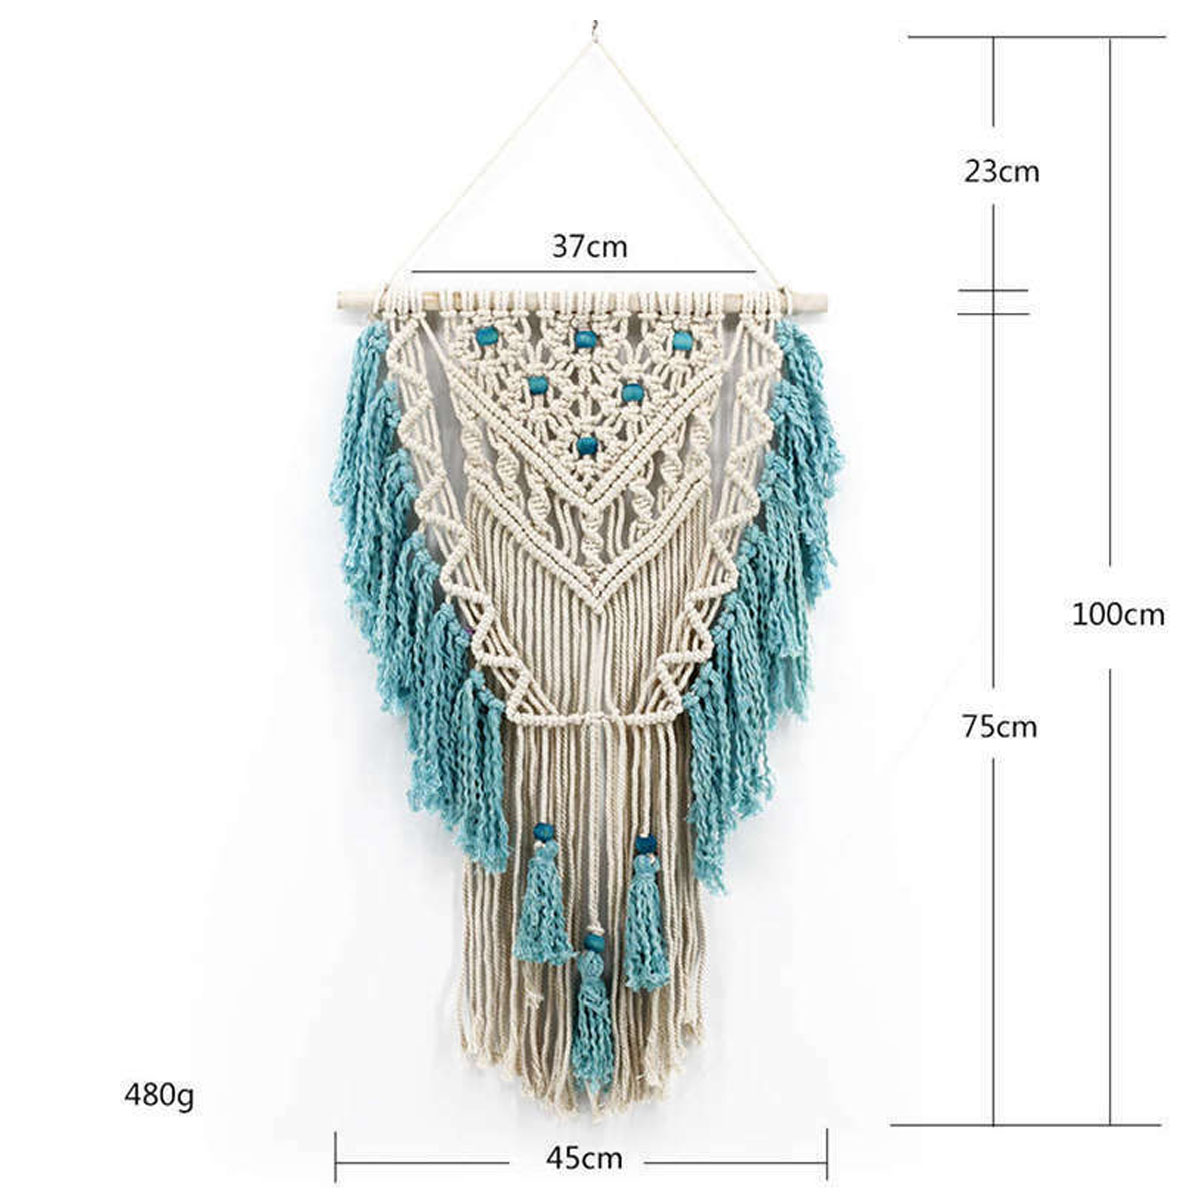 Hand-Knotted-Macrame-Wall-Art-Handmade-Bohemian-Hanging-Tapestry-Room-Decorations-1637667-4